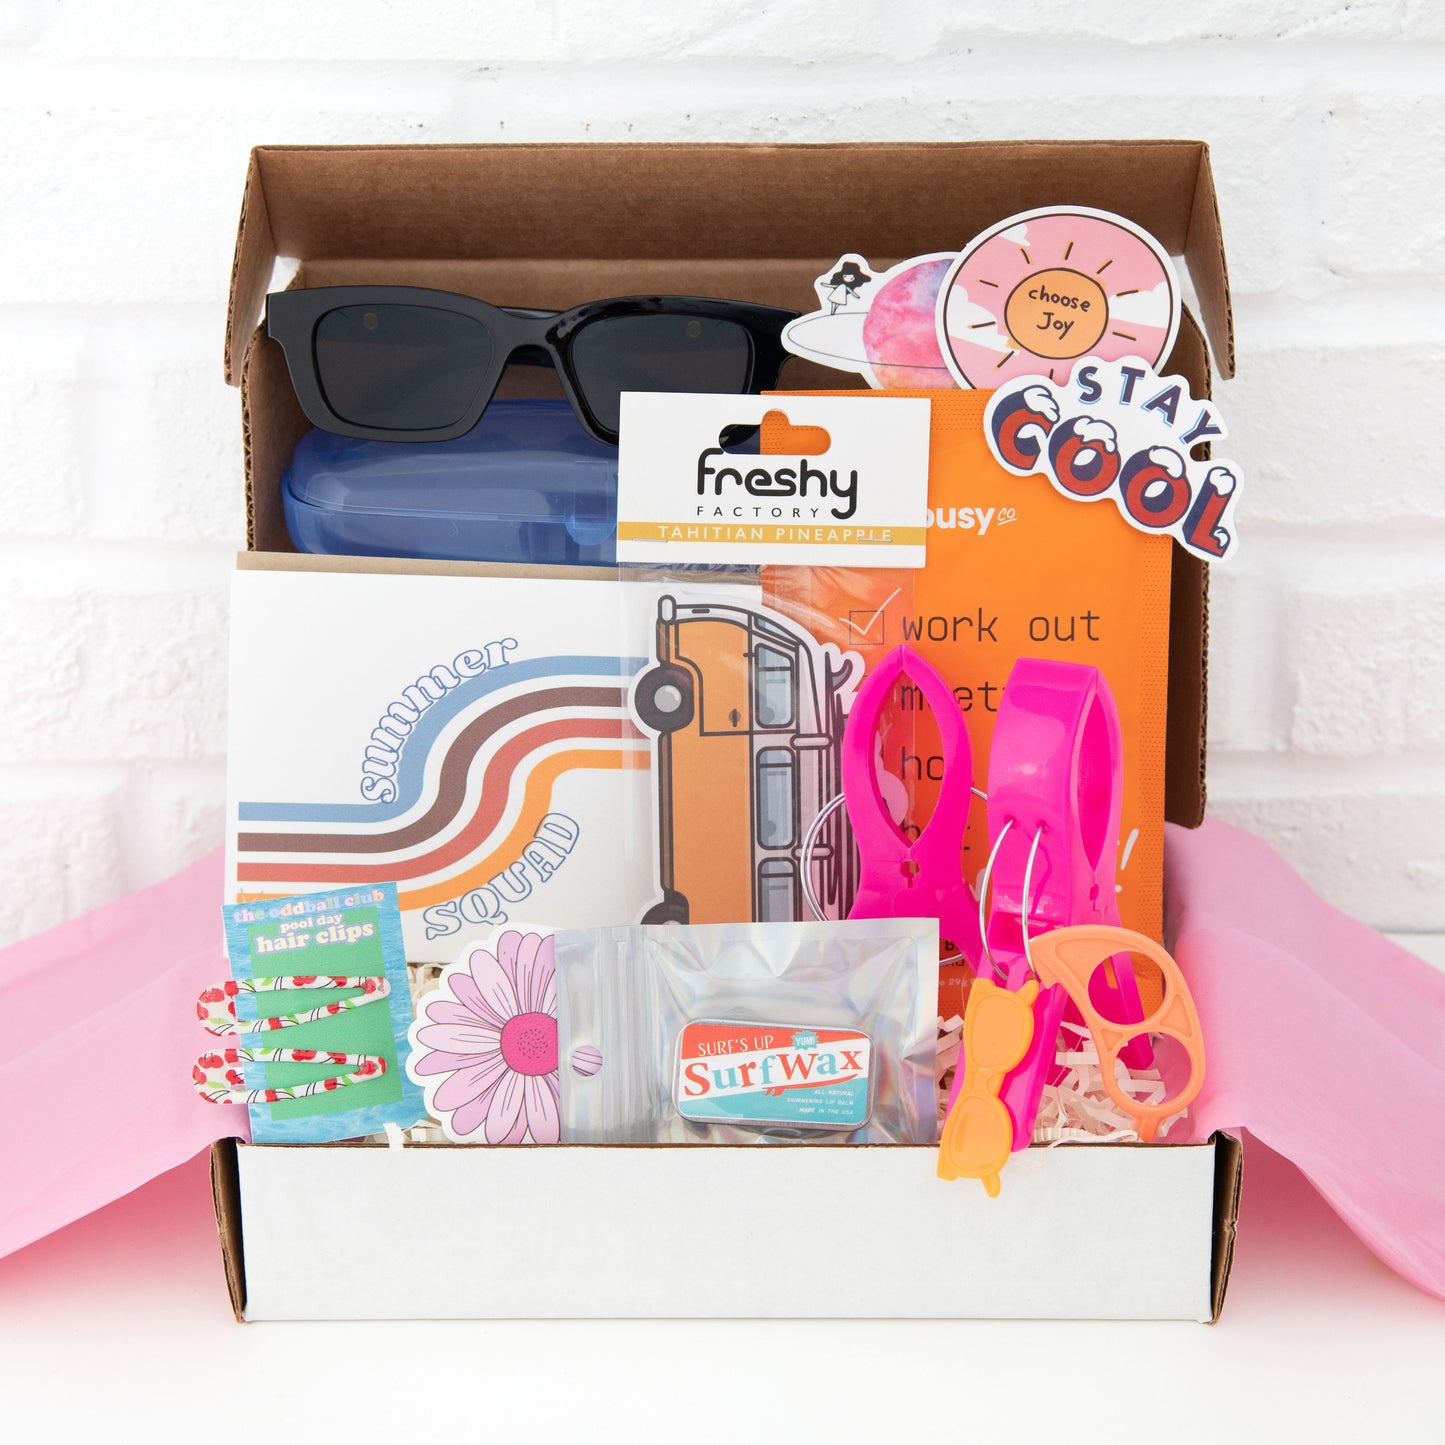 Get ready for summer with our subscription box! Includes sunglasses in a case, surf wax tin of chapstick, summer greeting card, and surf van air freshener. Perfect for beach lovers and surfers. Shop now on Ratbone Skinny and enjoy the sun in style!